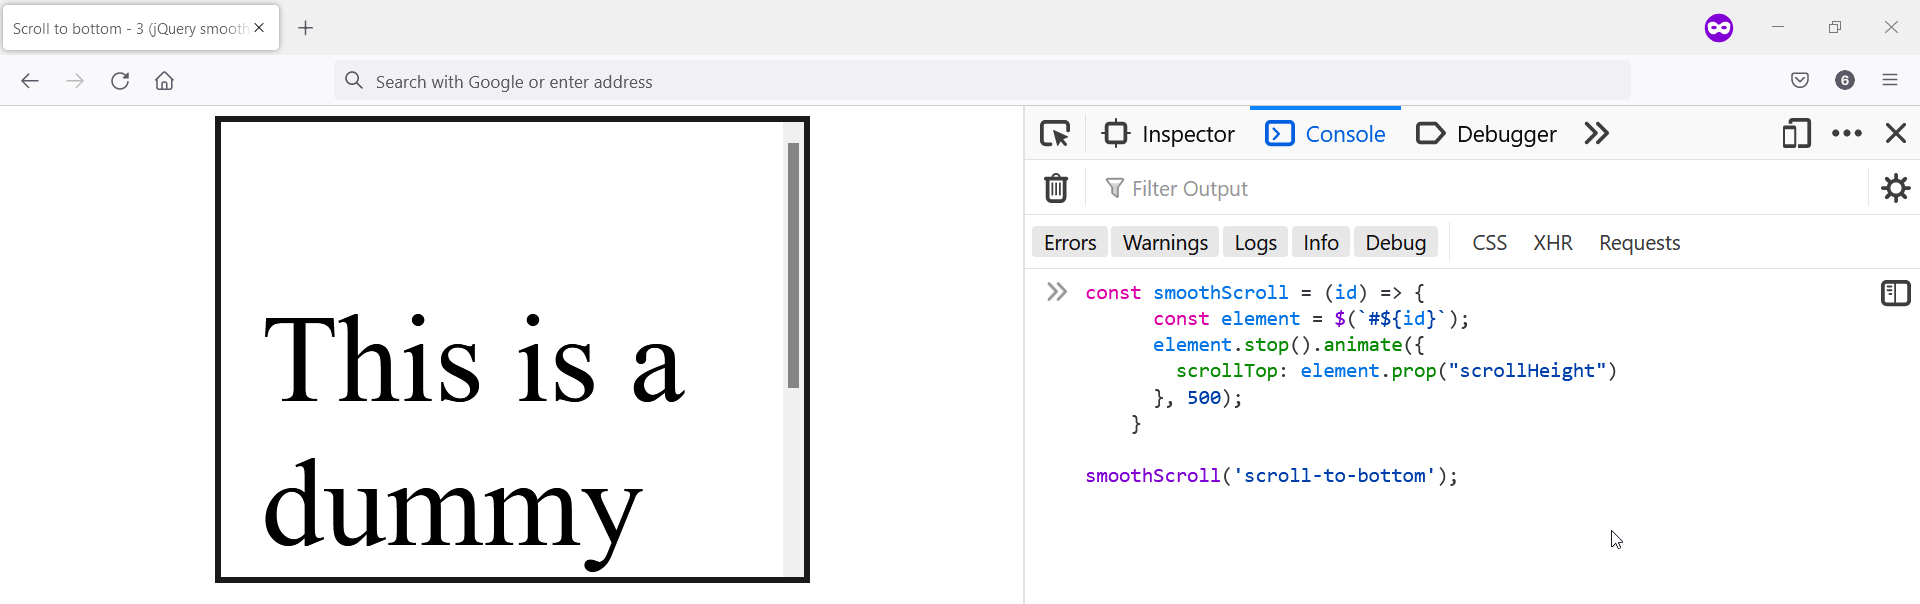 Scroll to bottom with jQuery smooth animation